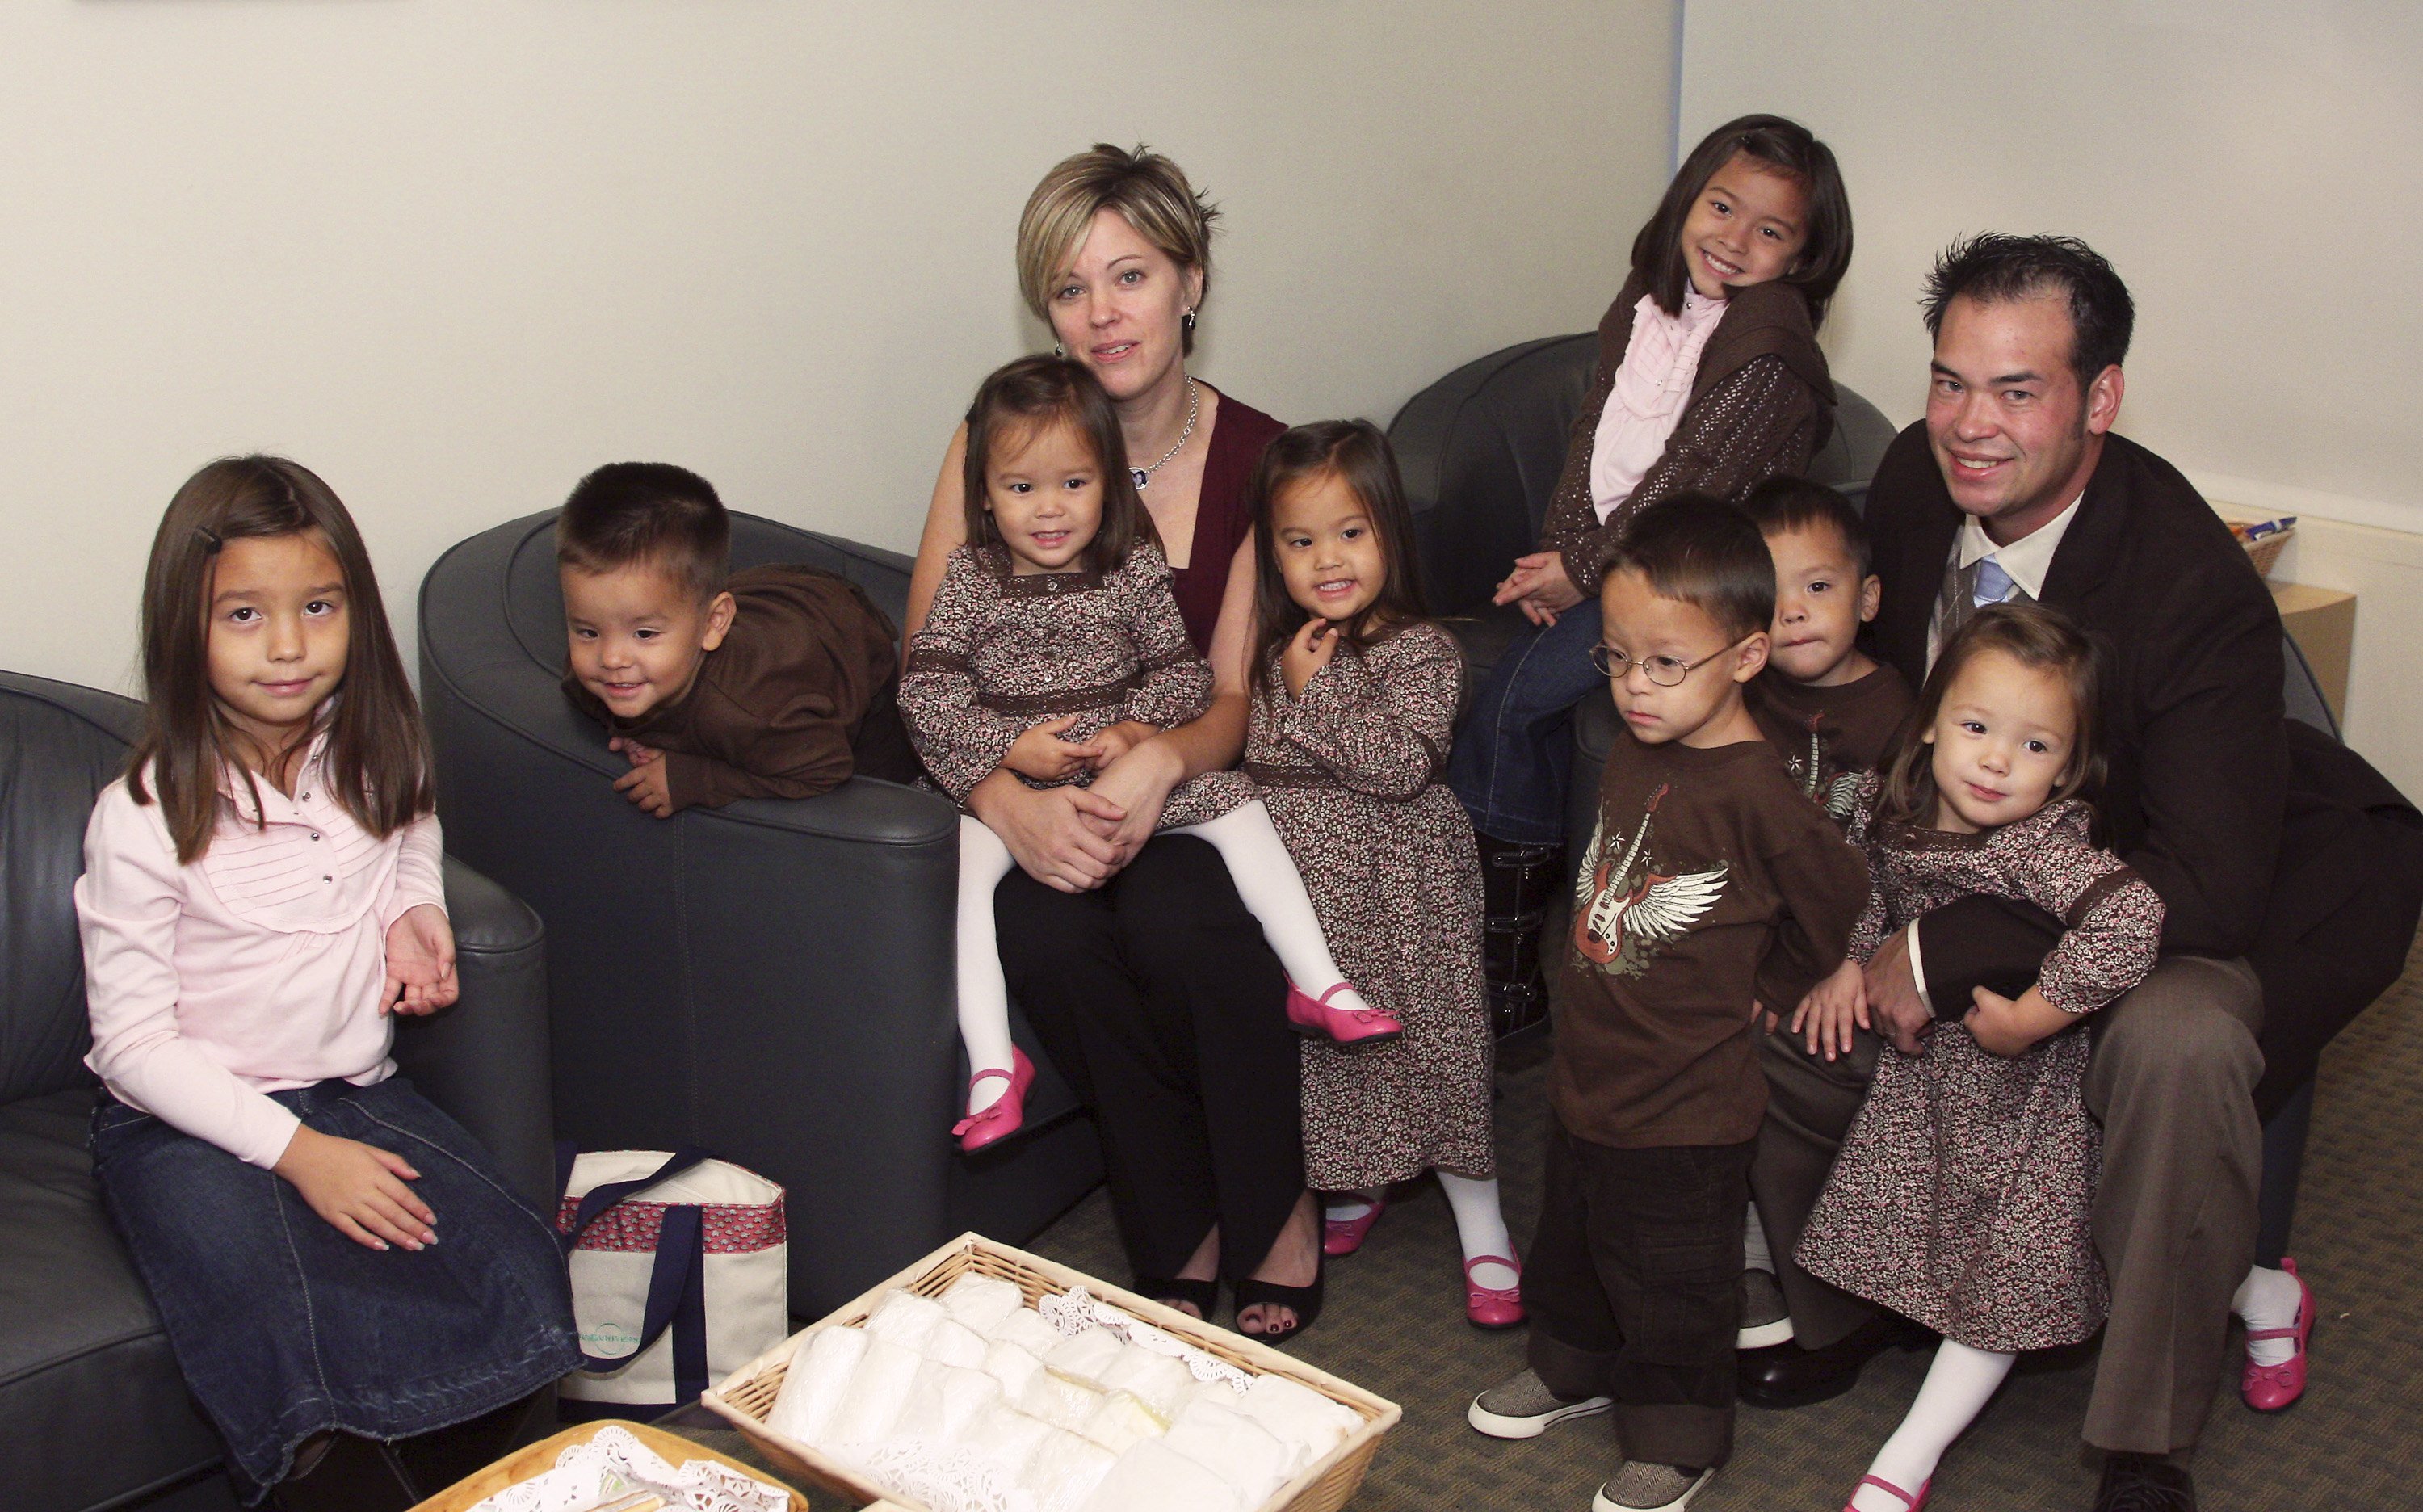 Kate and Jon Gosselin talk about their twin daughters and sextuplets on "Today" on October 2, 2007. | Source: Getty Images